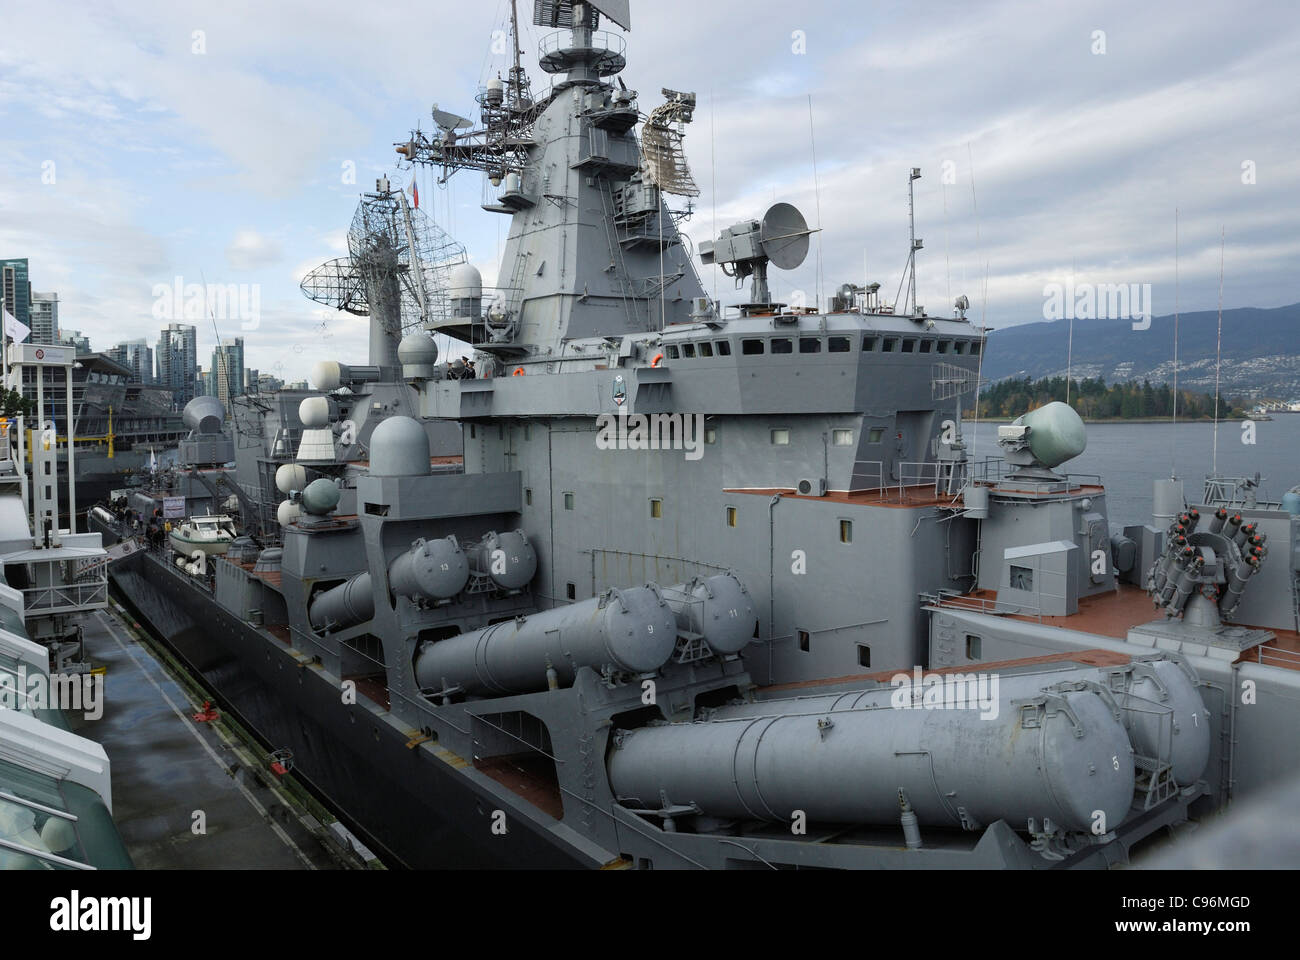 Russian missile cruiser Varyag, berthed at Canada Place. 35 years since a Russian Naval vessel has visited Vancouver. Stock Photo